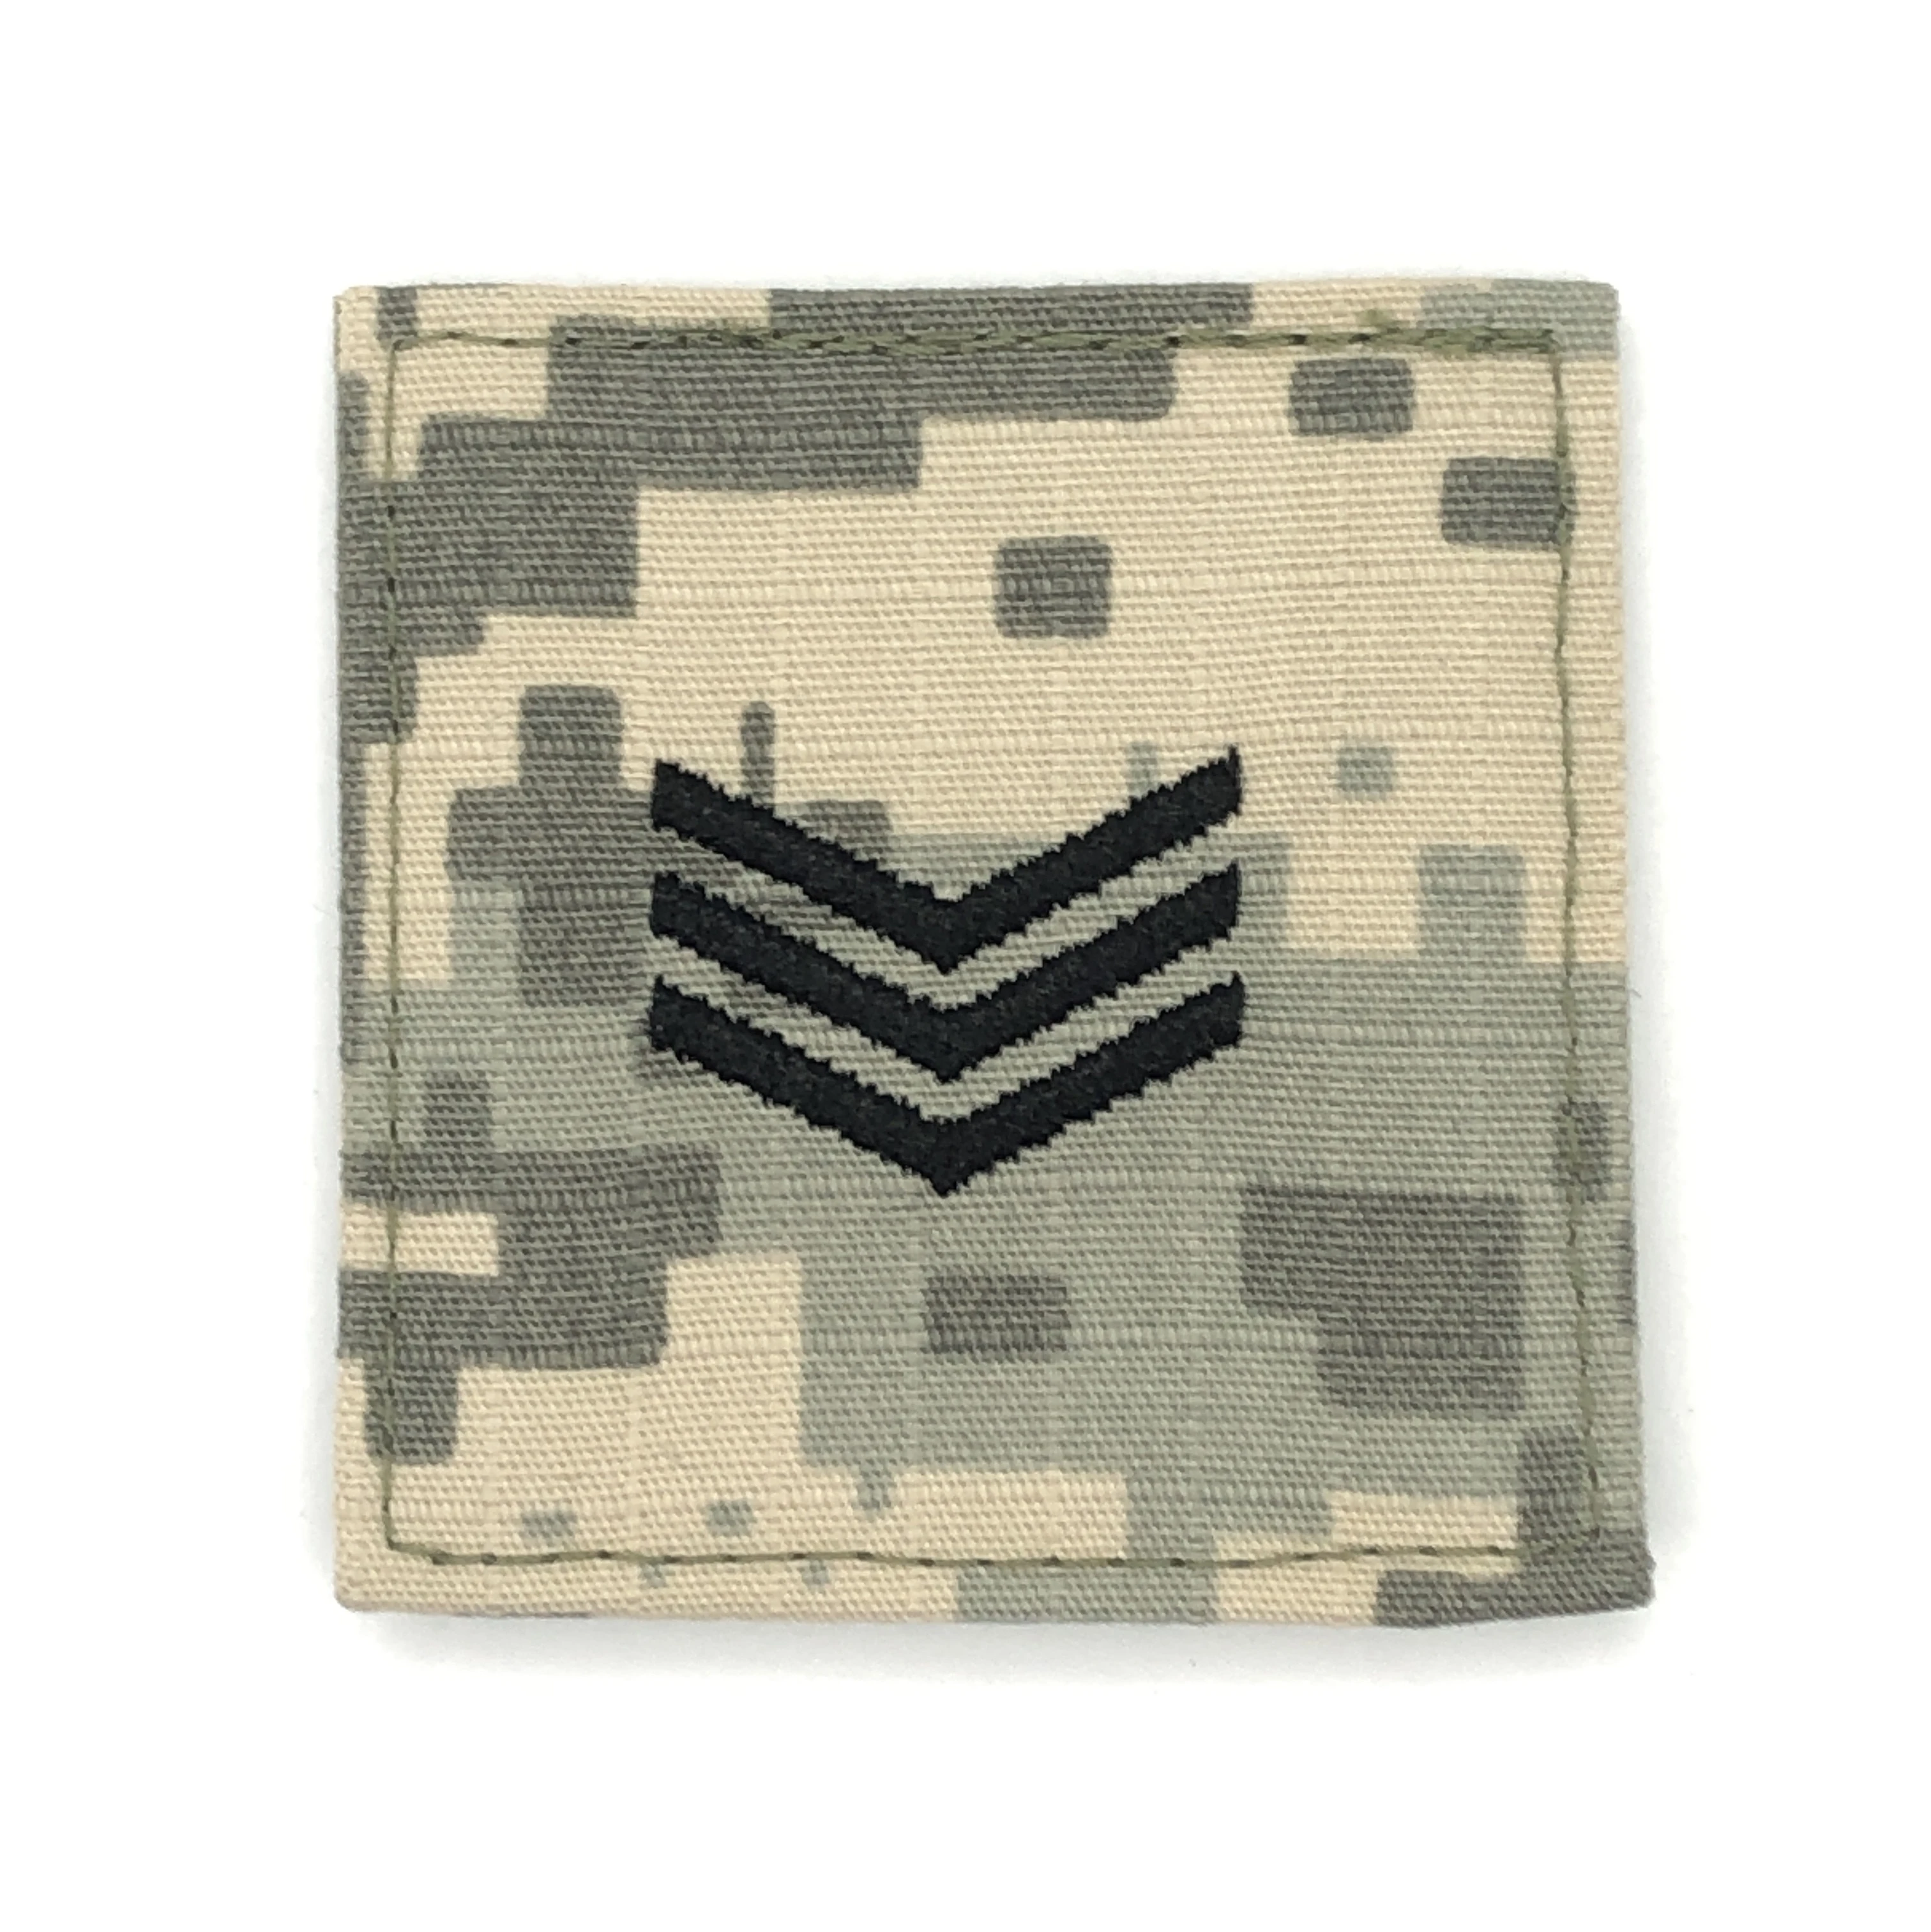 Customized Camouflage Military Rank Embroidered Patch For Army Accessory With Hook And Loop